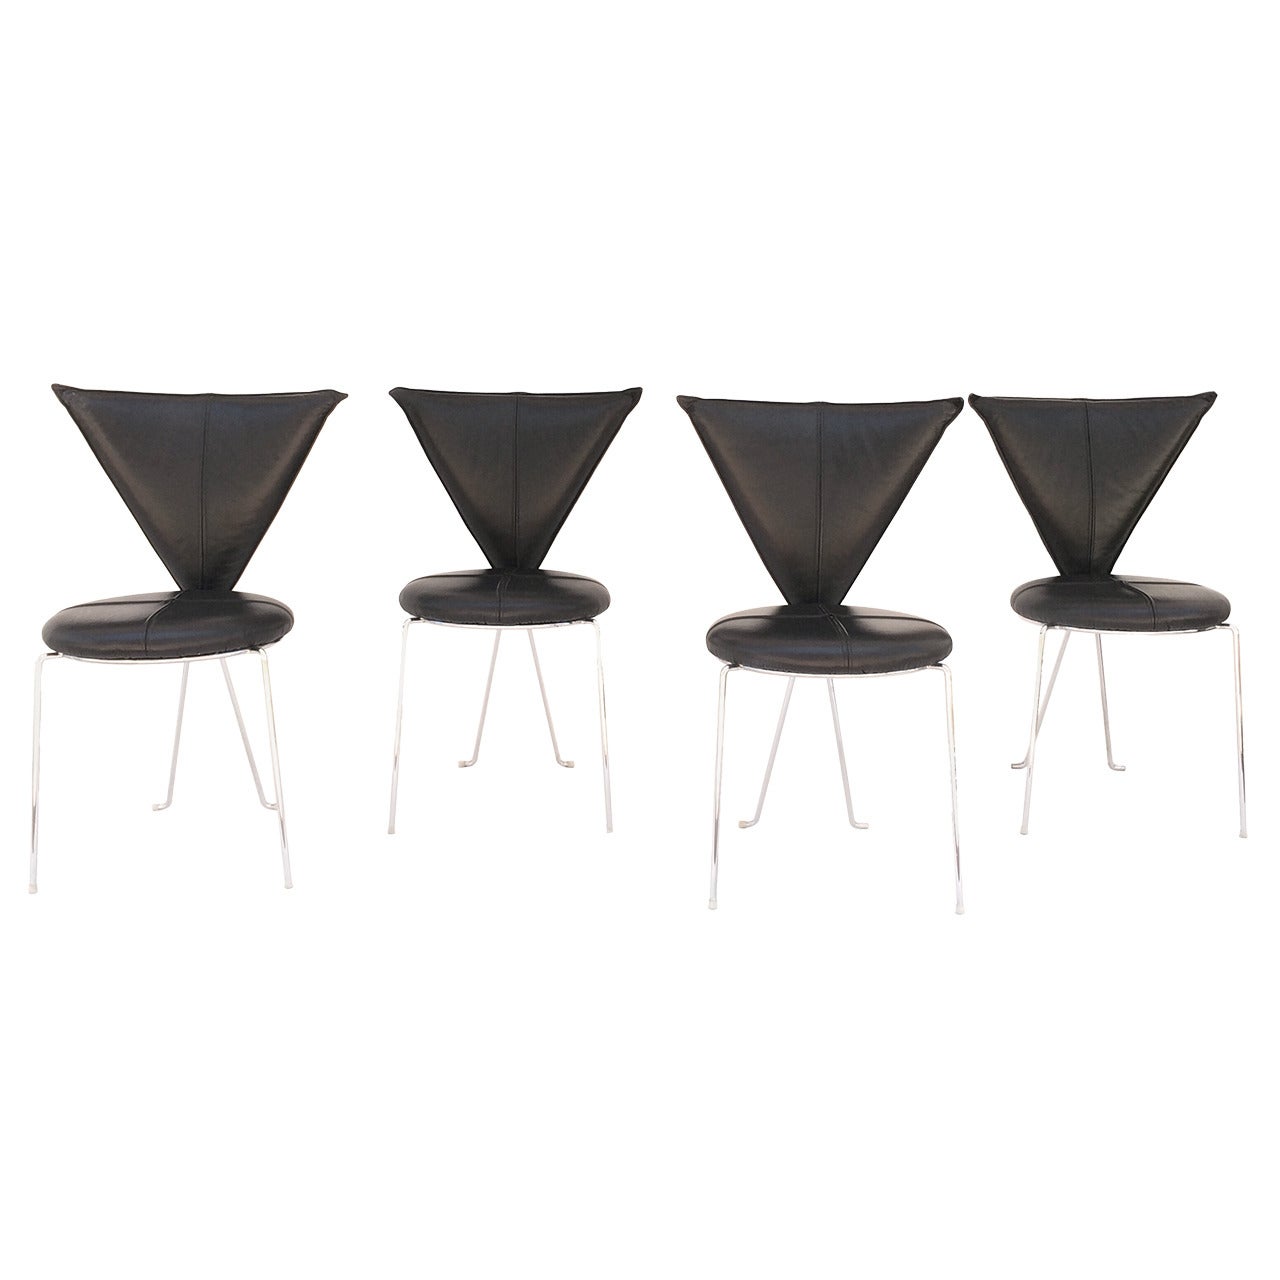 Rare Set of Four Black Leather and Chrome Chairs by Helmut Lubke & Co For Sale